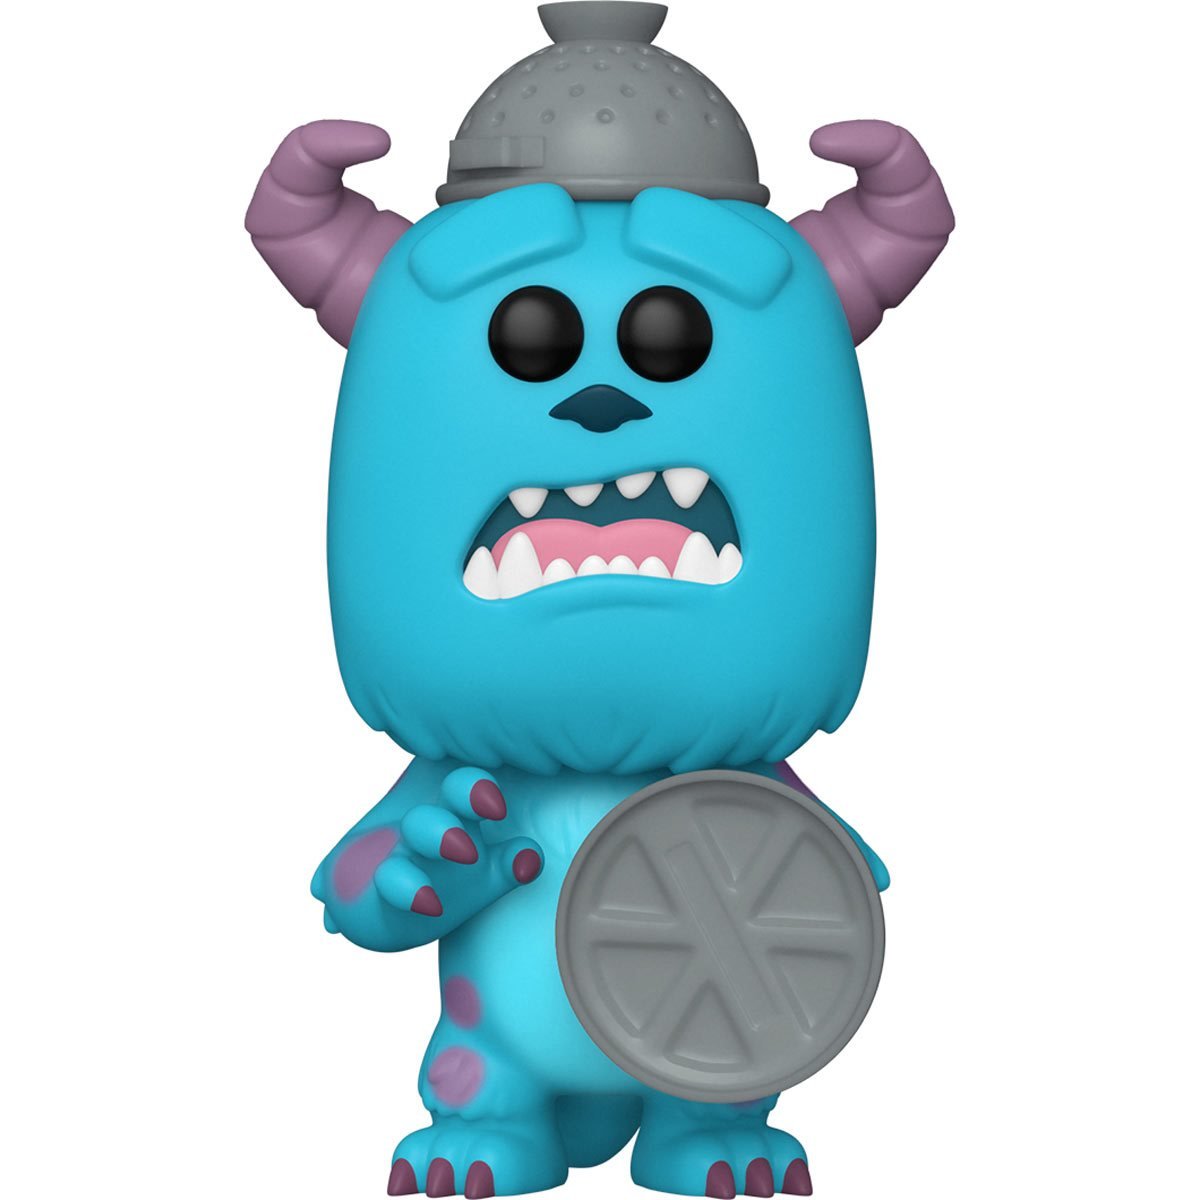 Funko Pop! Monsters, Inc. 20th Anniversary: Sulley with Lid